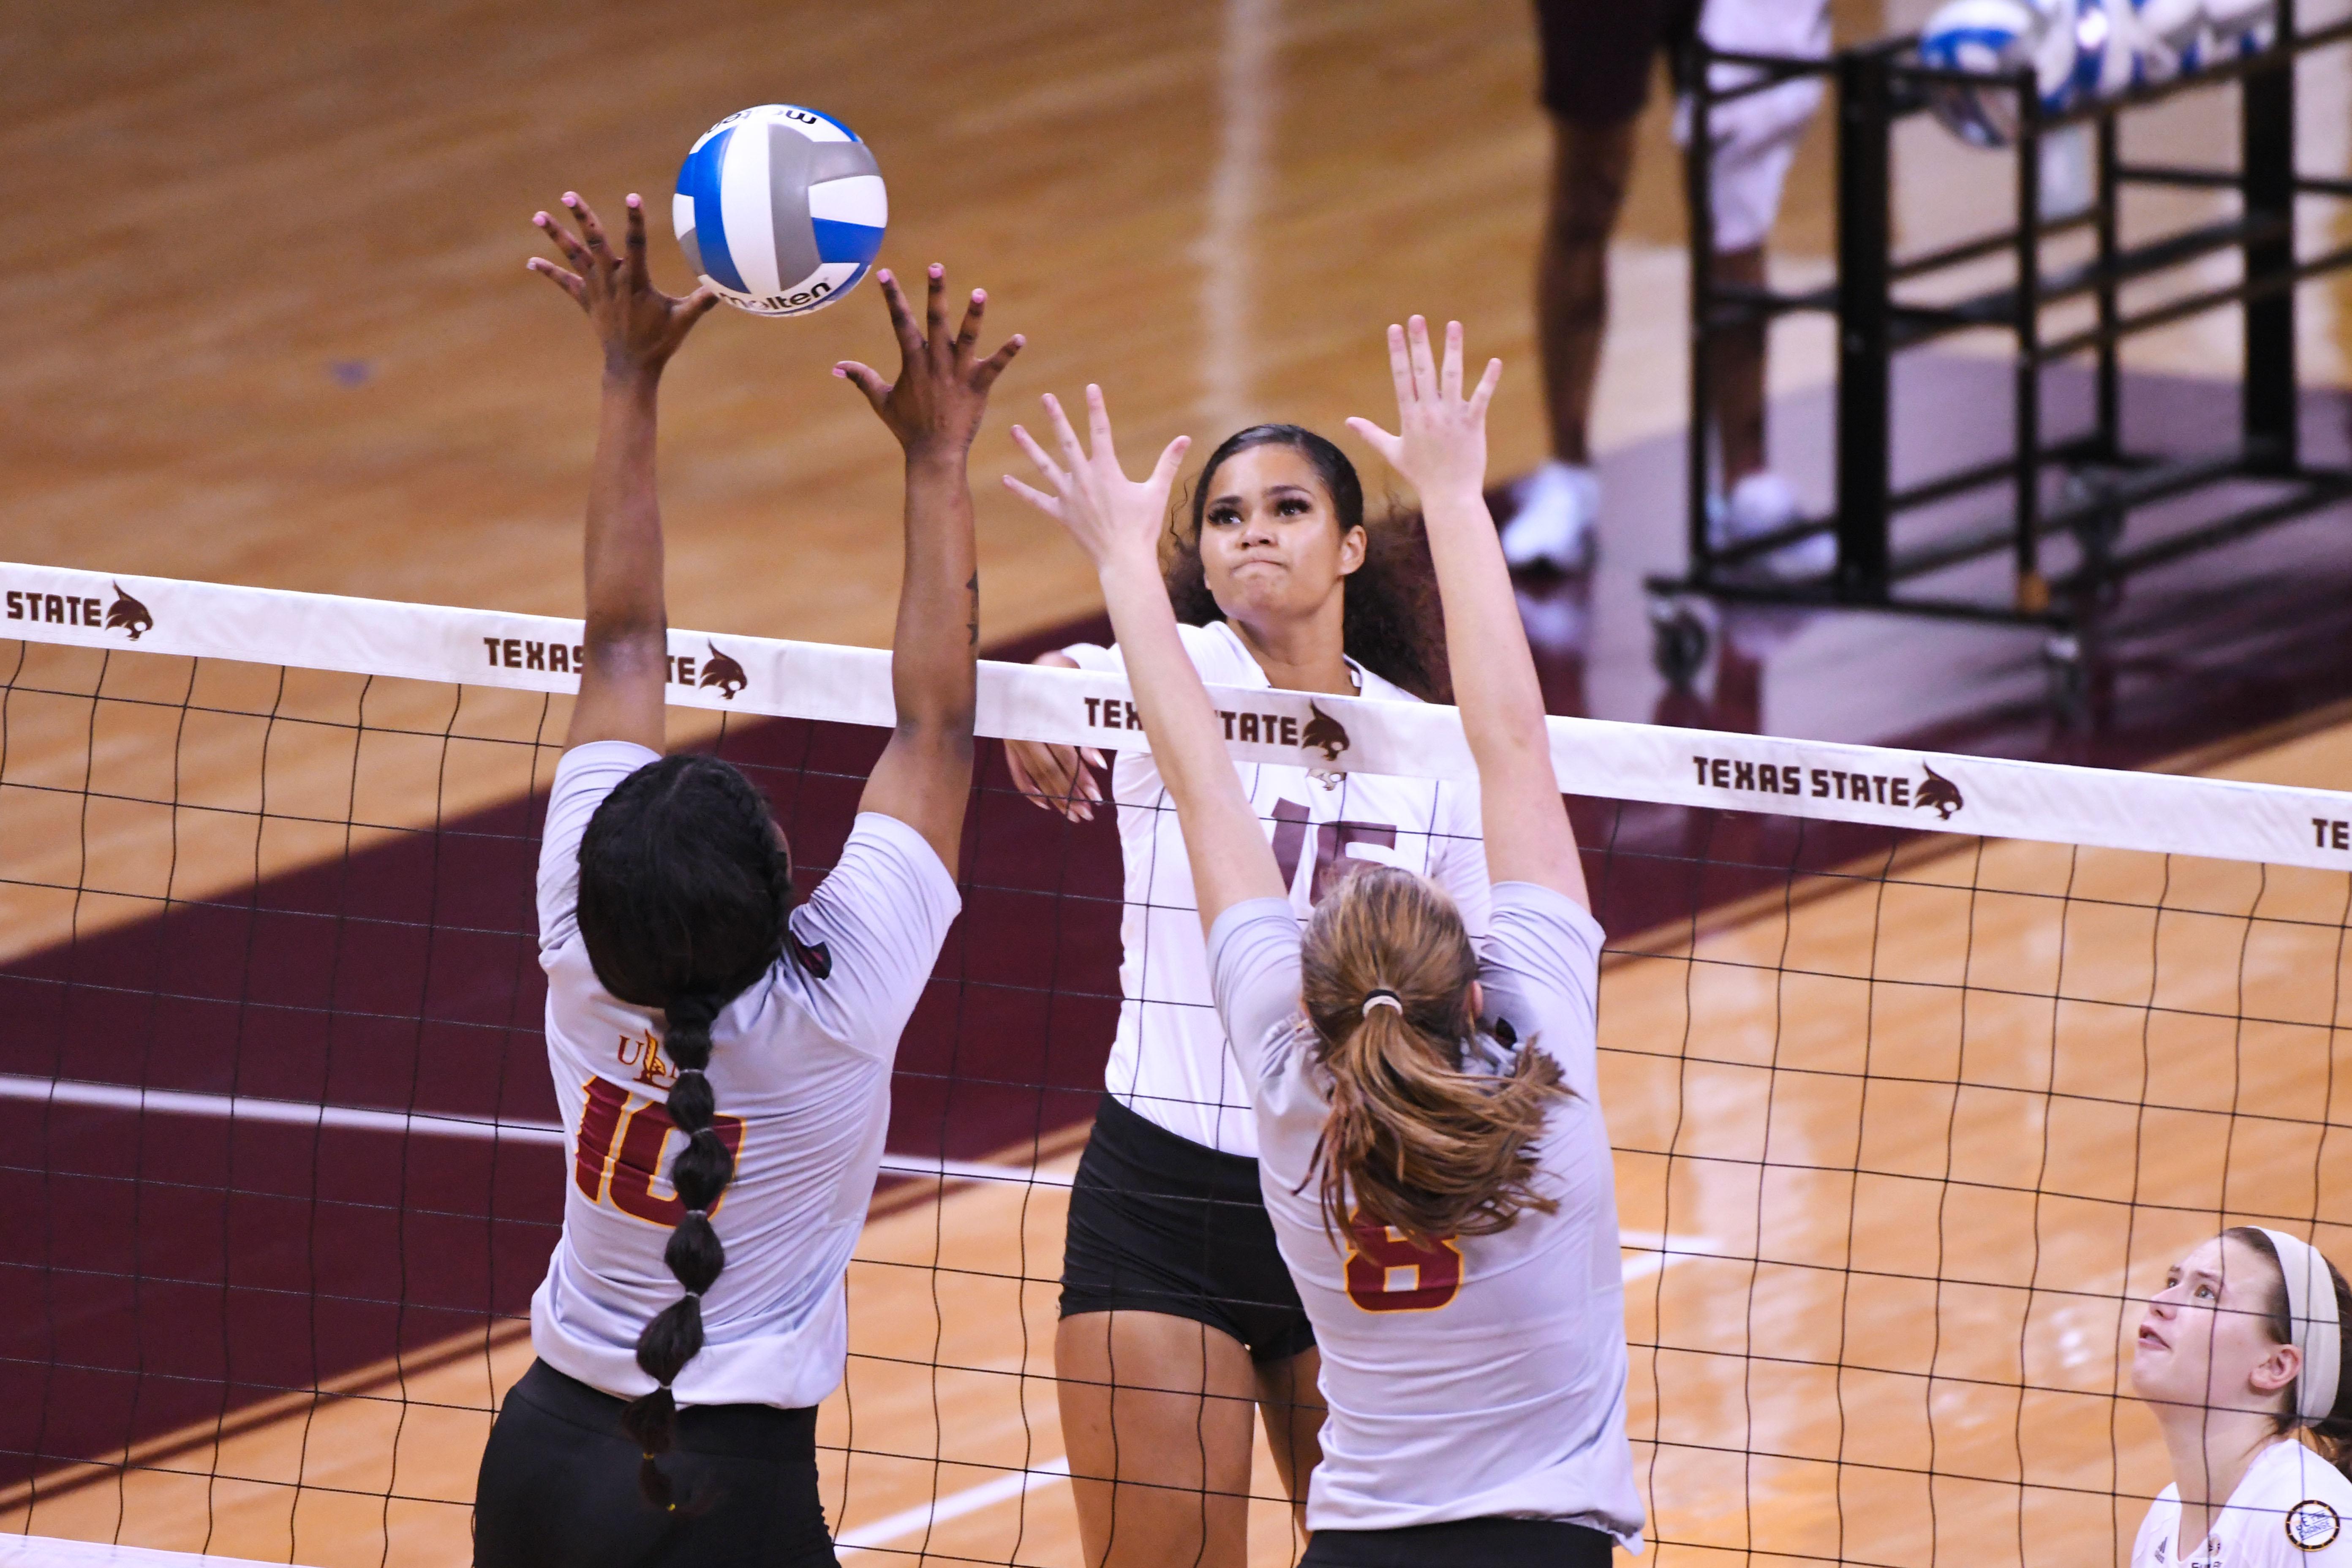 Texas State adds 14 matches to spring volleyball schedule San Marcos